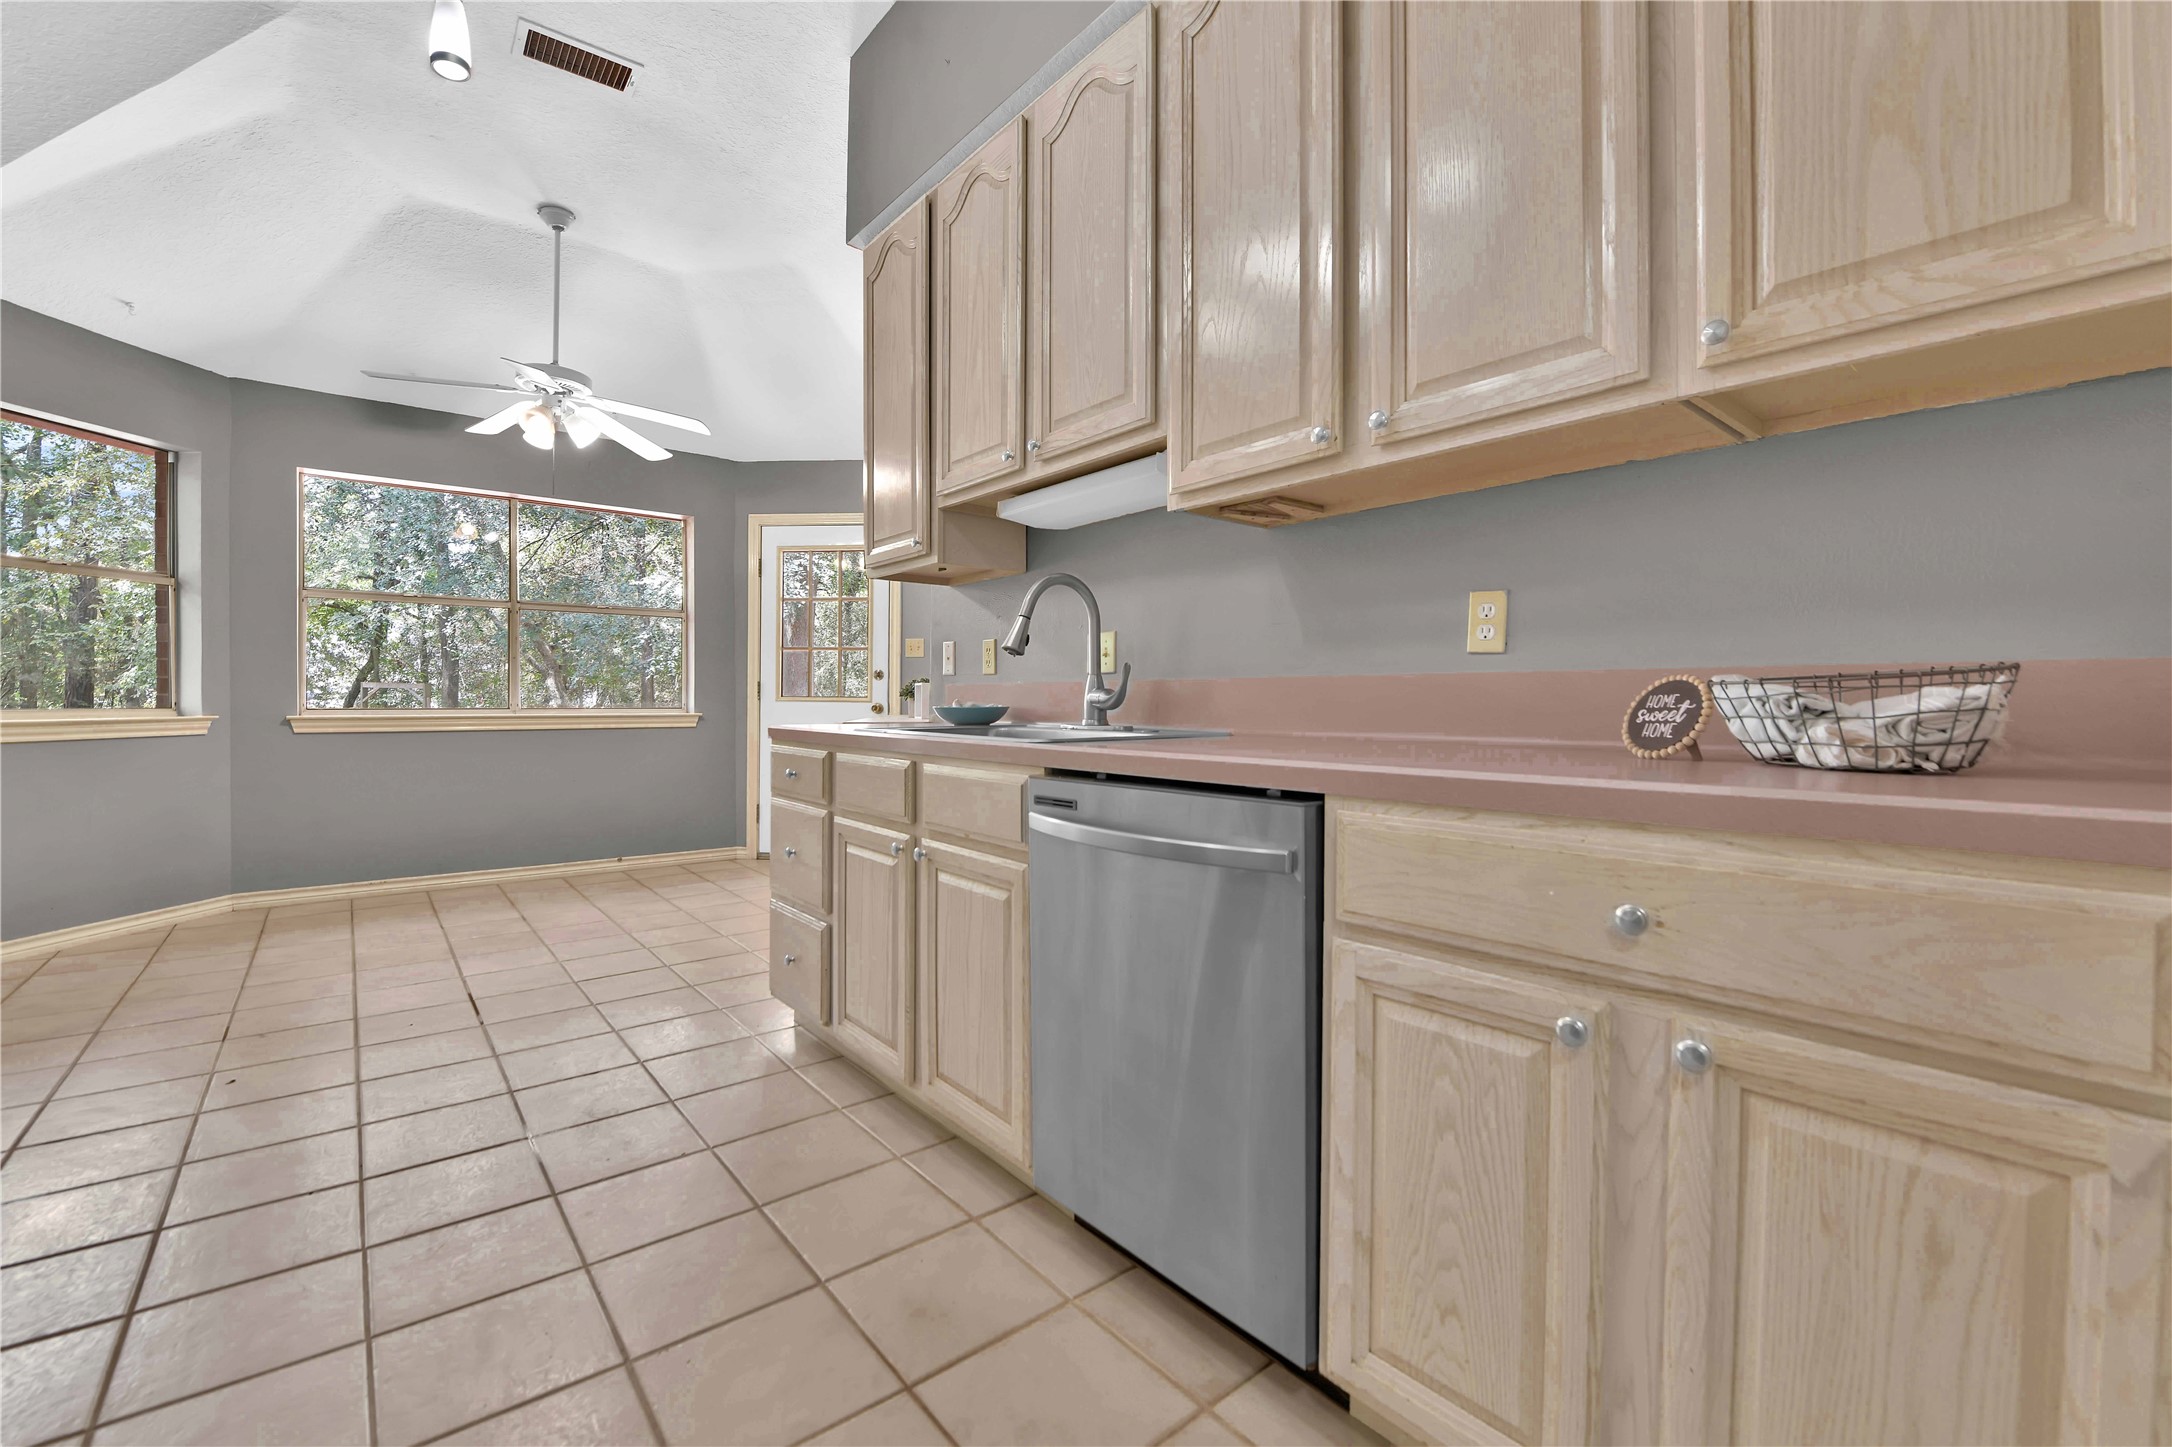 16603 Surrey Ln-  Kitchen is a large galley style kitchen with a breakfast room for your outdoor viewing pleasure.